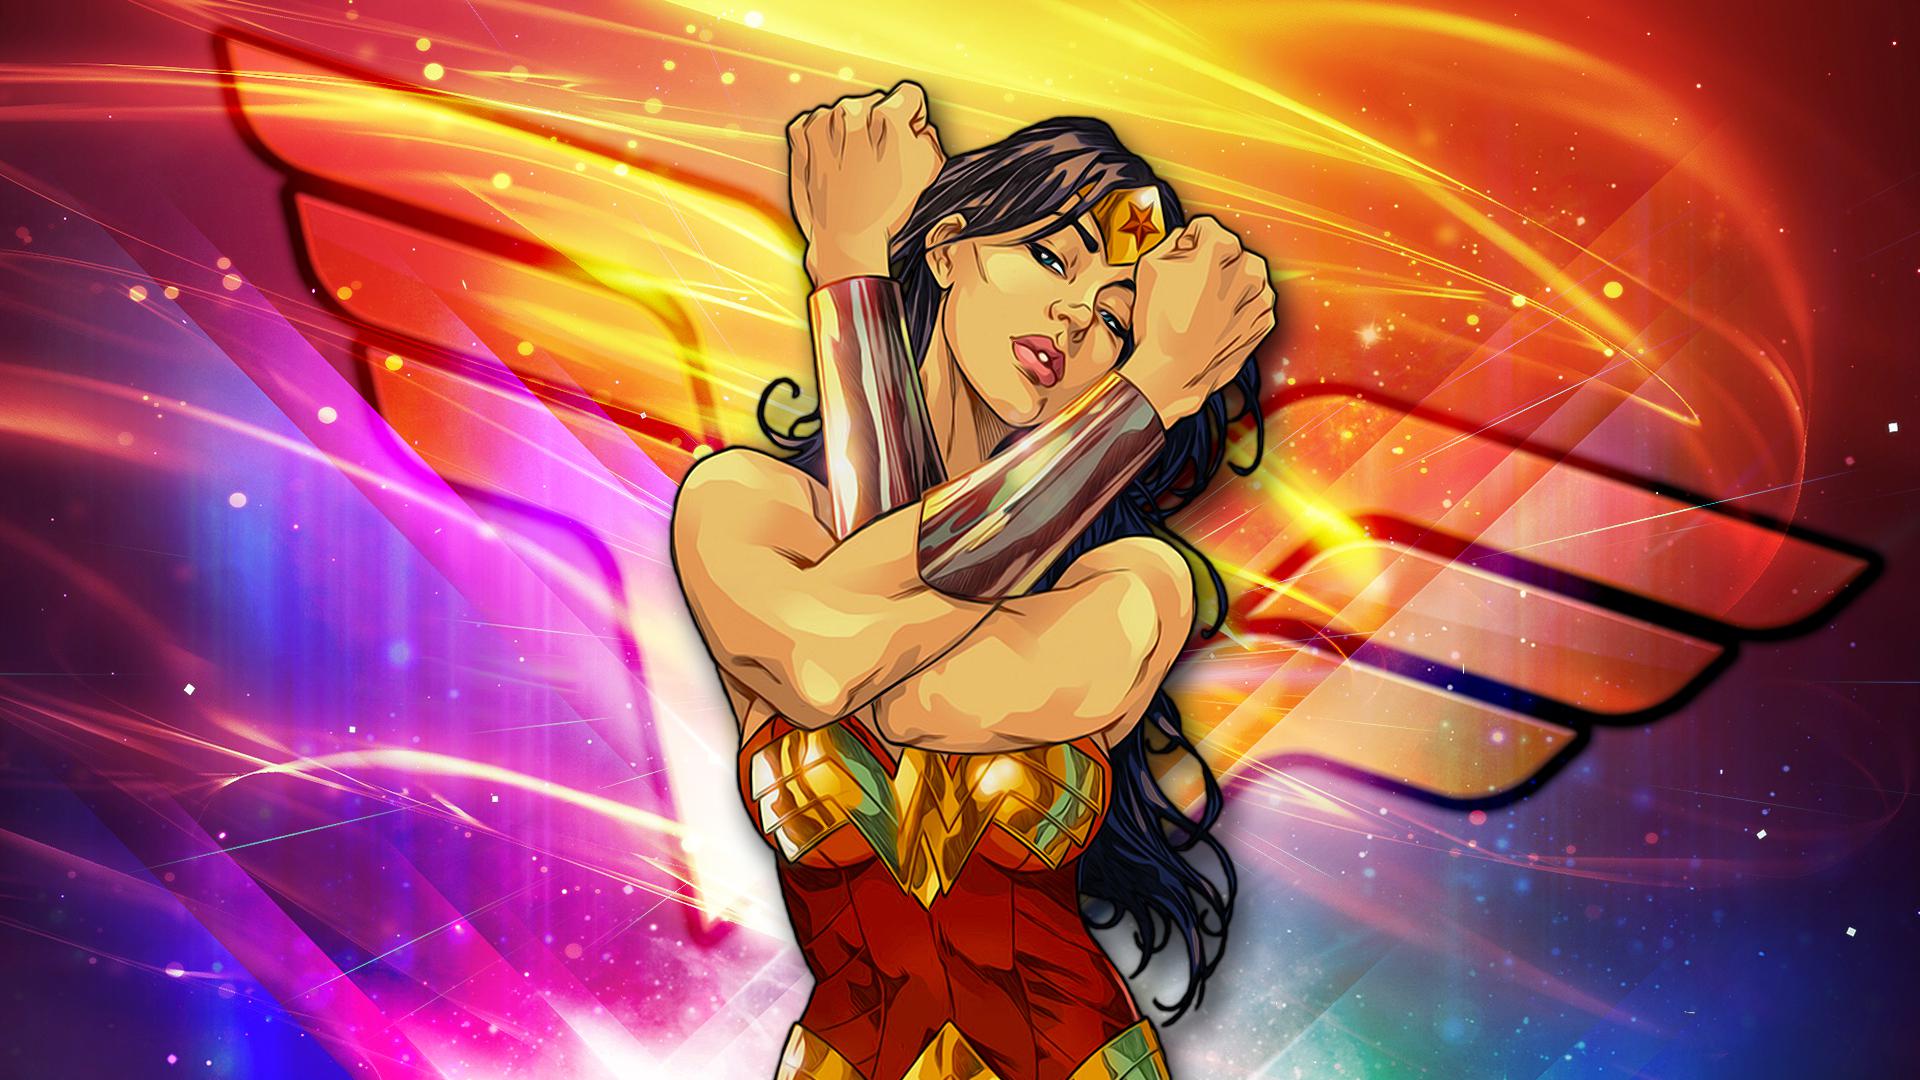 Wonder woman - - High Quality and Resolution Wallpapers